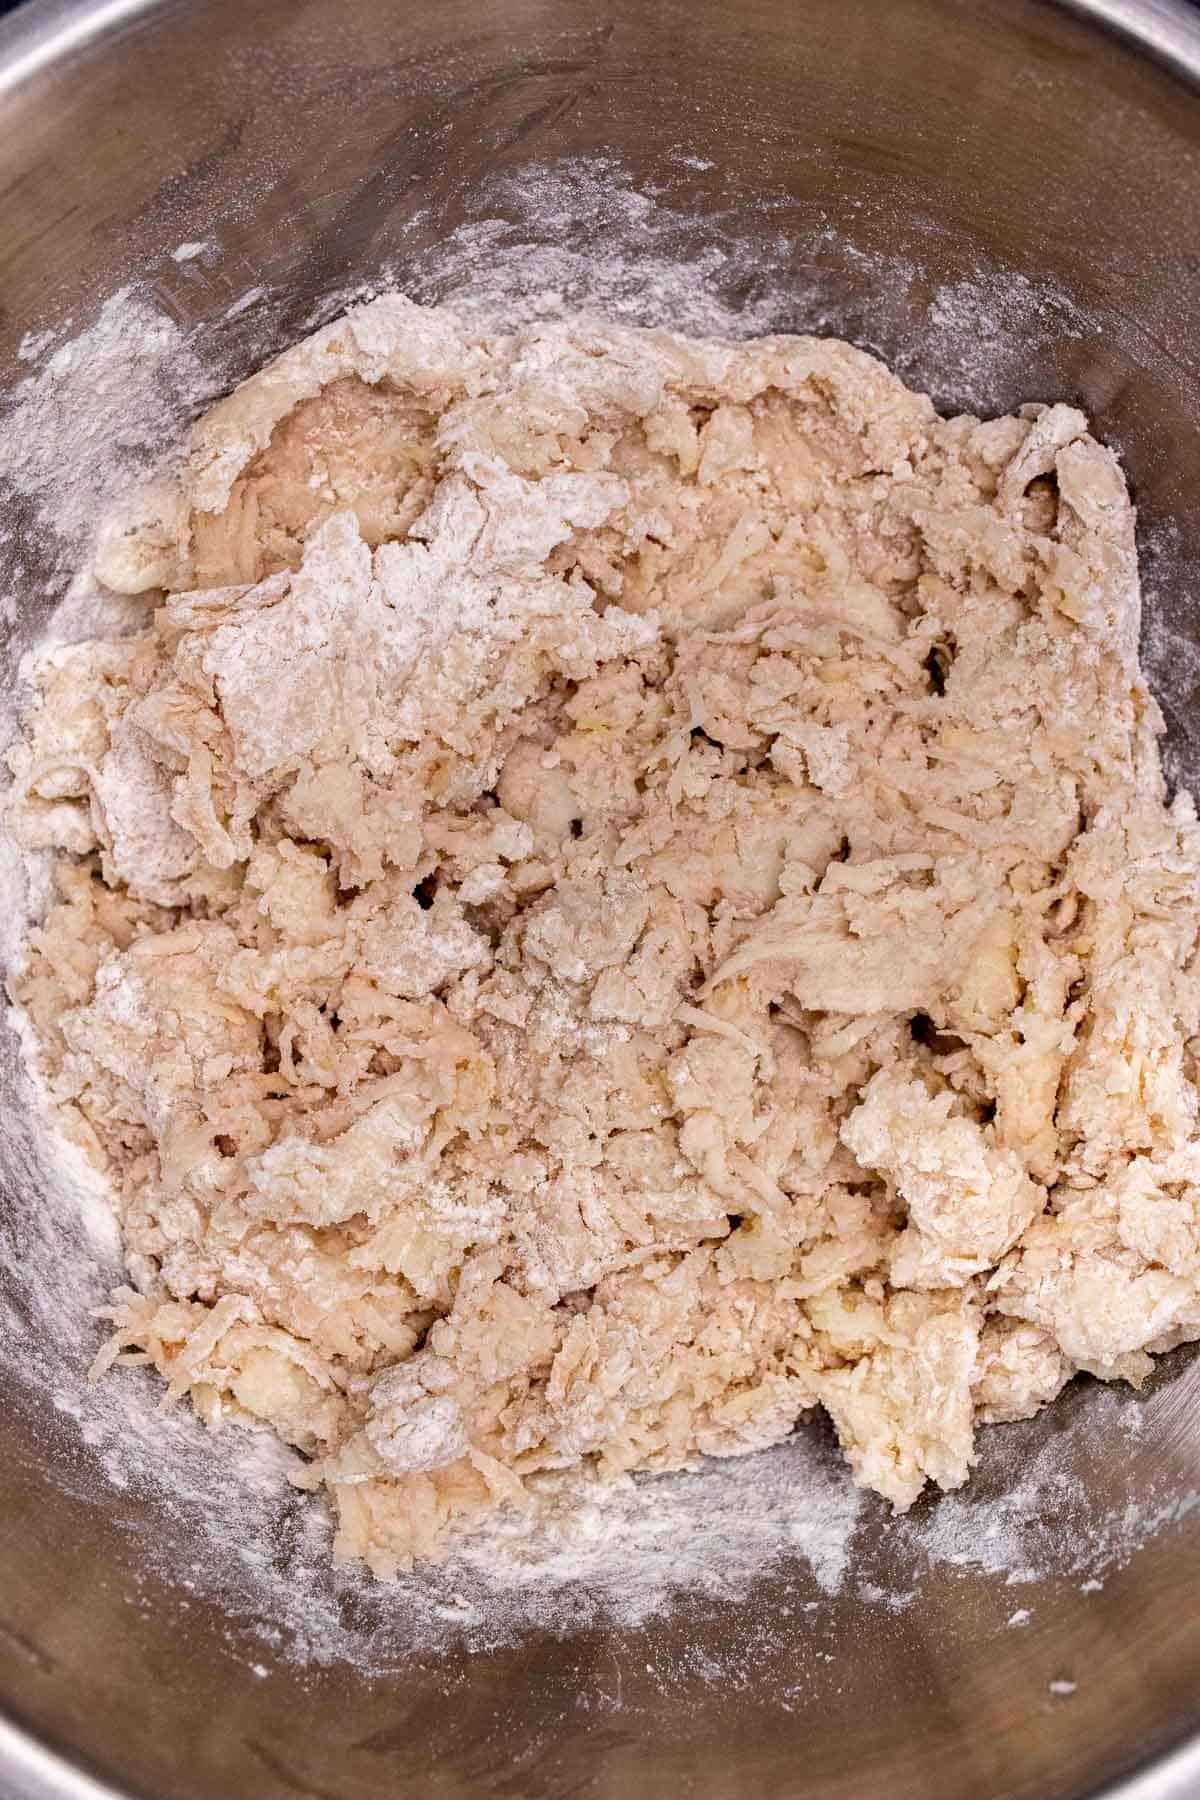 Flour, salt, and baking soda mixed into the mashed potatoes for Boxty.